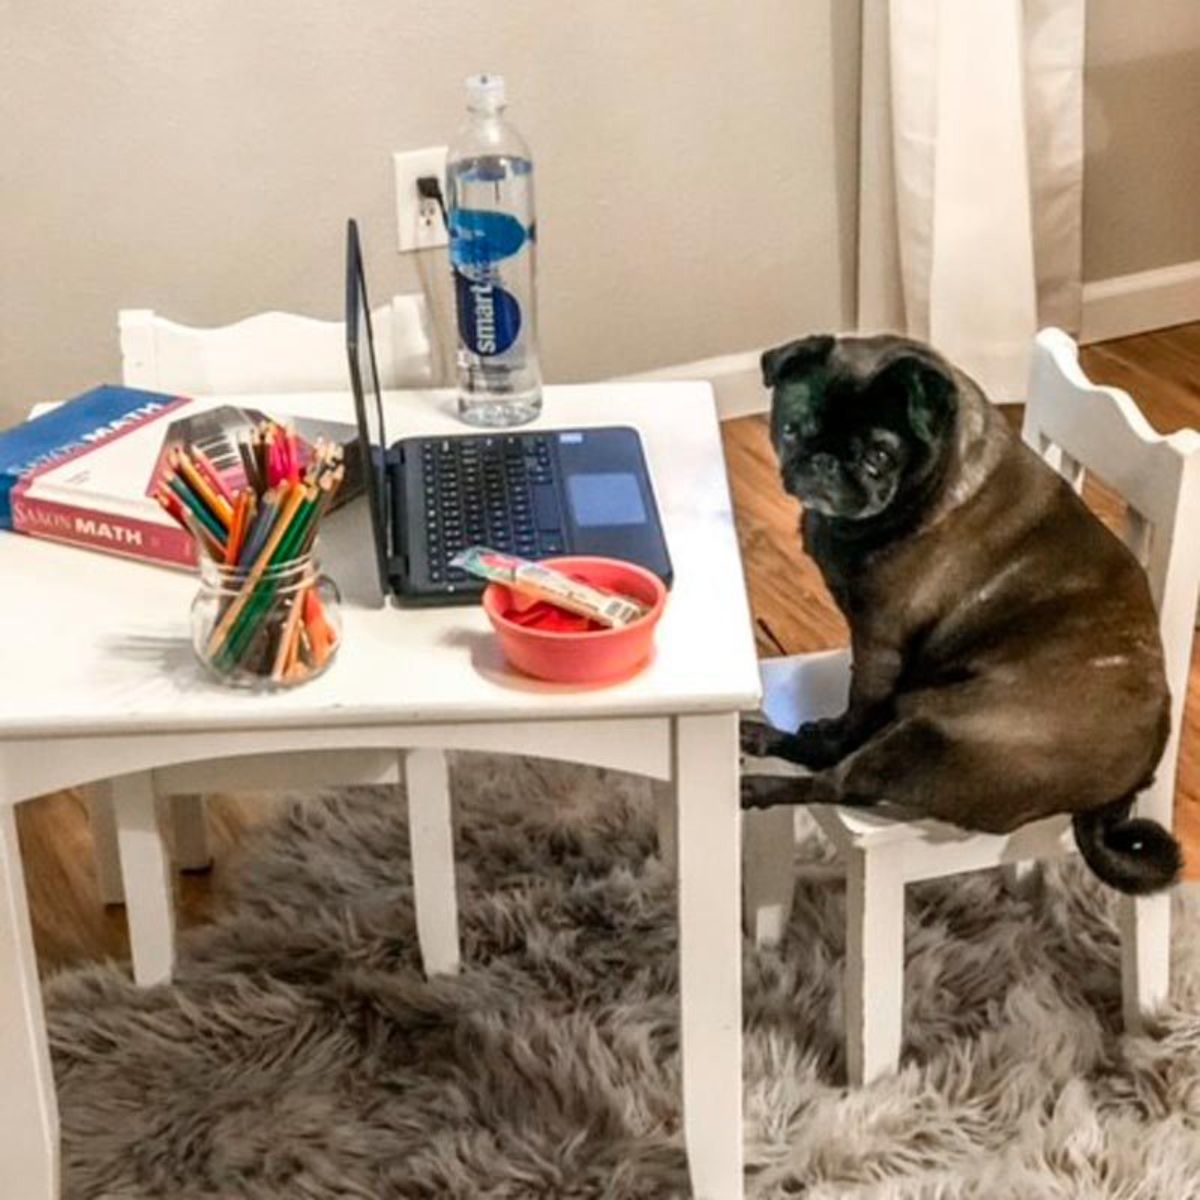 black pug sitting on a white chair in front of a black laptop, a book, a jar of pencils, a bottle and snacks on a white table